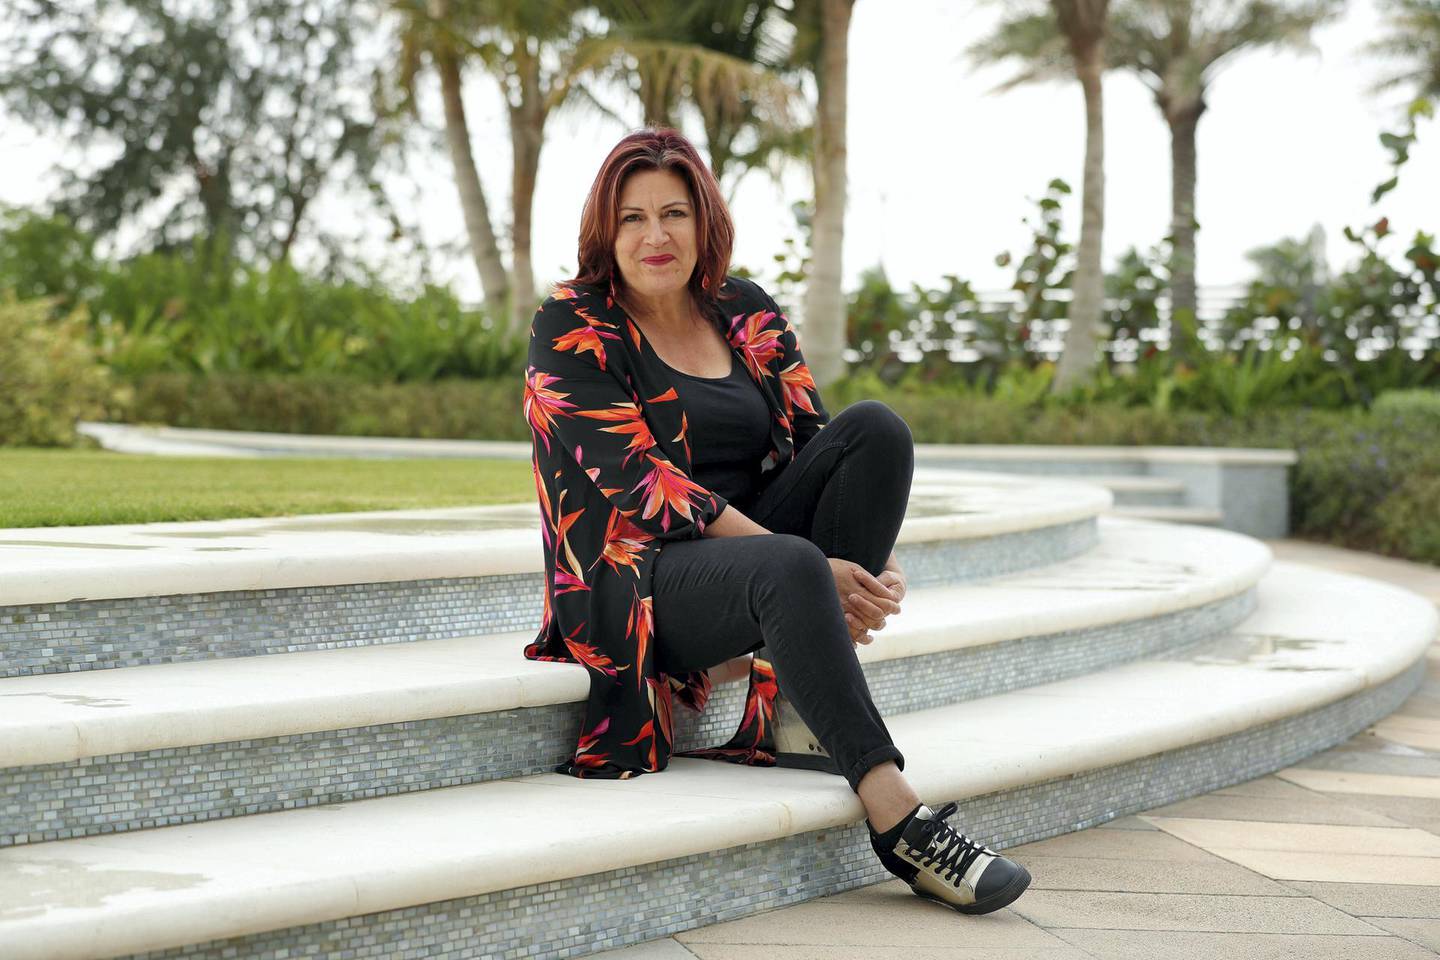 Dubai, United Arab Emirates - Reporter: Katy Gillett: Paula Newby for a story about women who have gone through the menopause. Monday, January 27th, 2020. The Palm, Dubai. Chris Whiteoak / The National